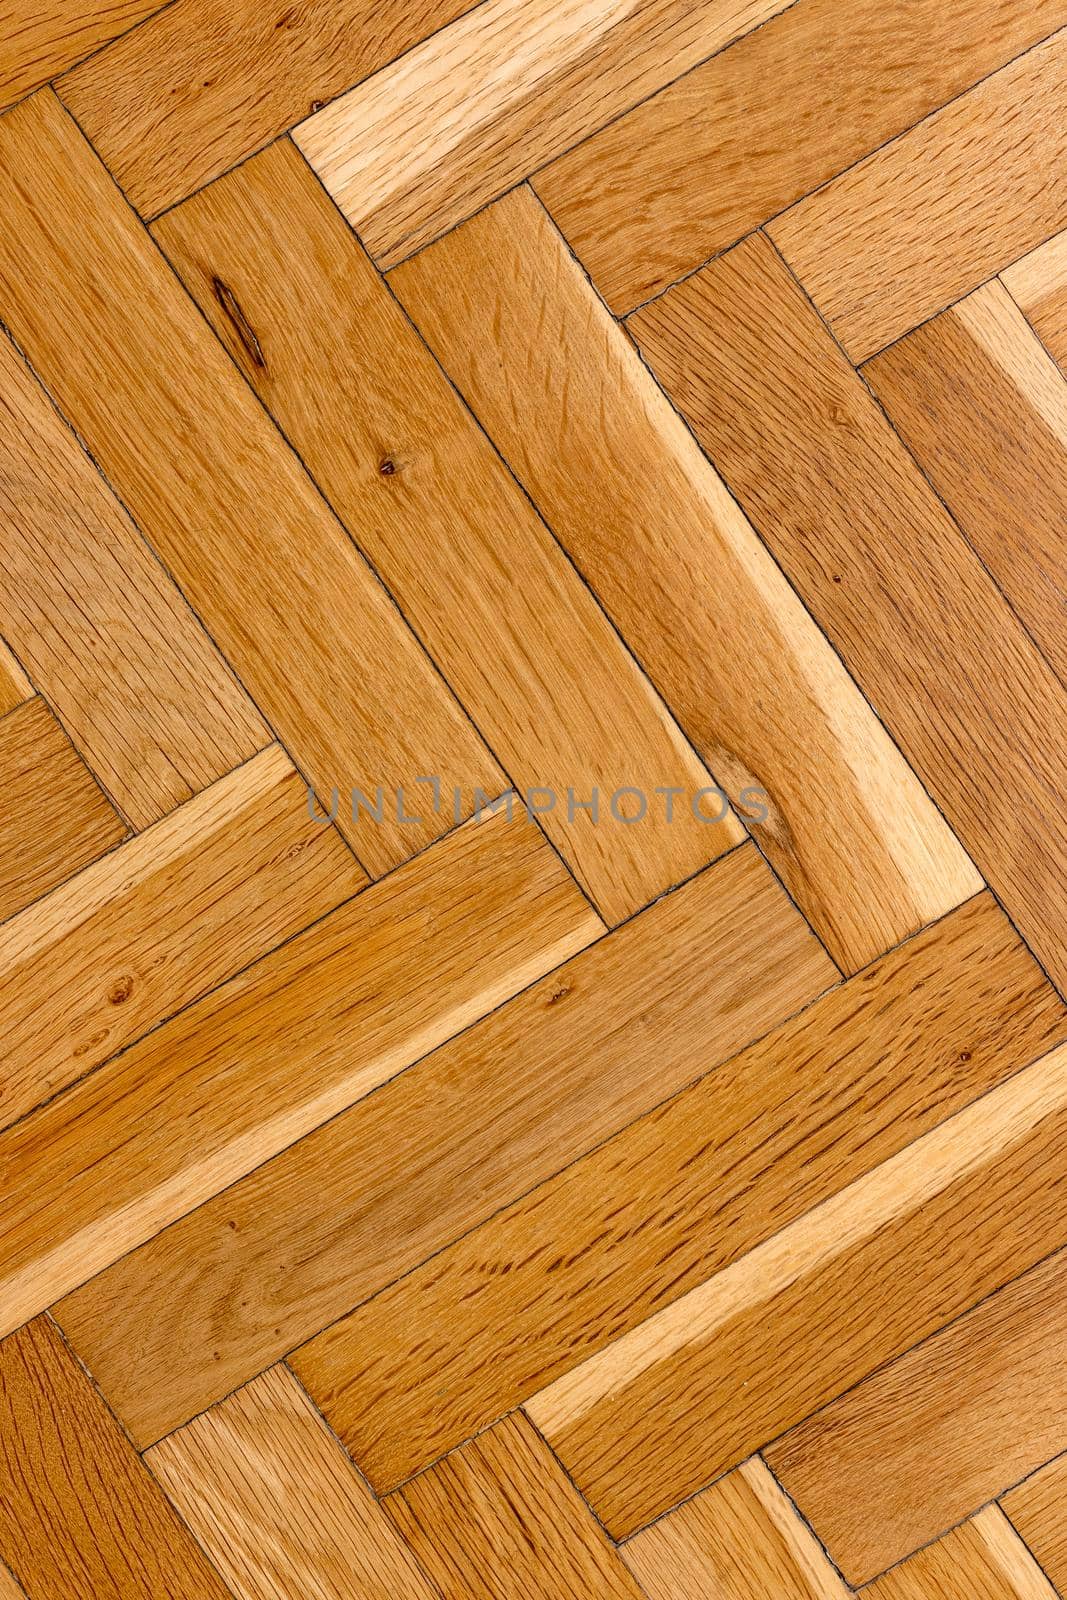 old parquet flooring, parquet board lined with Herringbone pattern